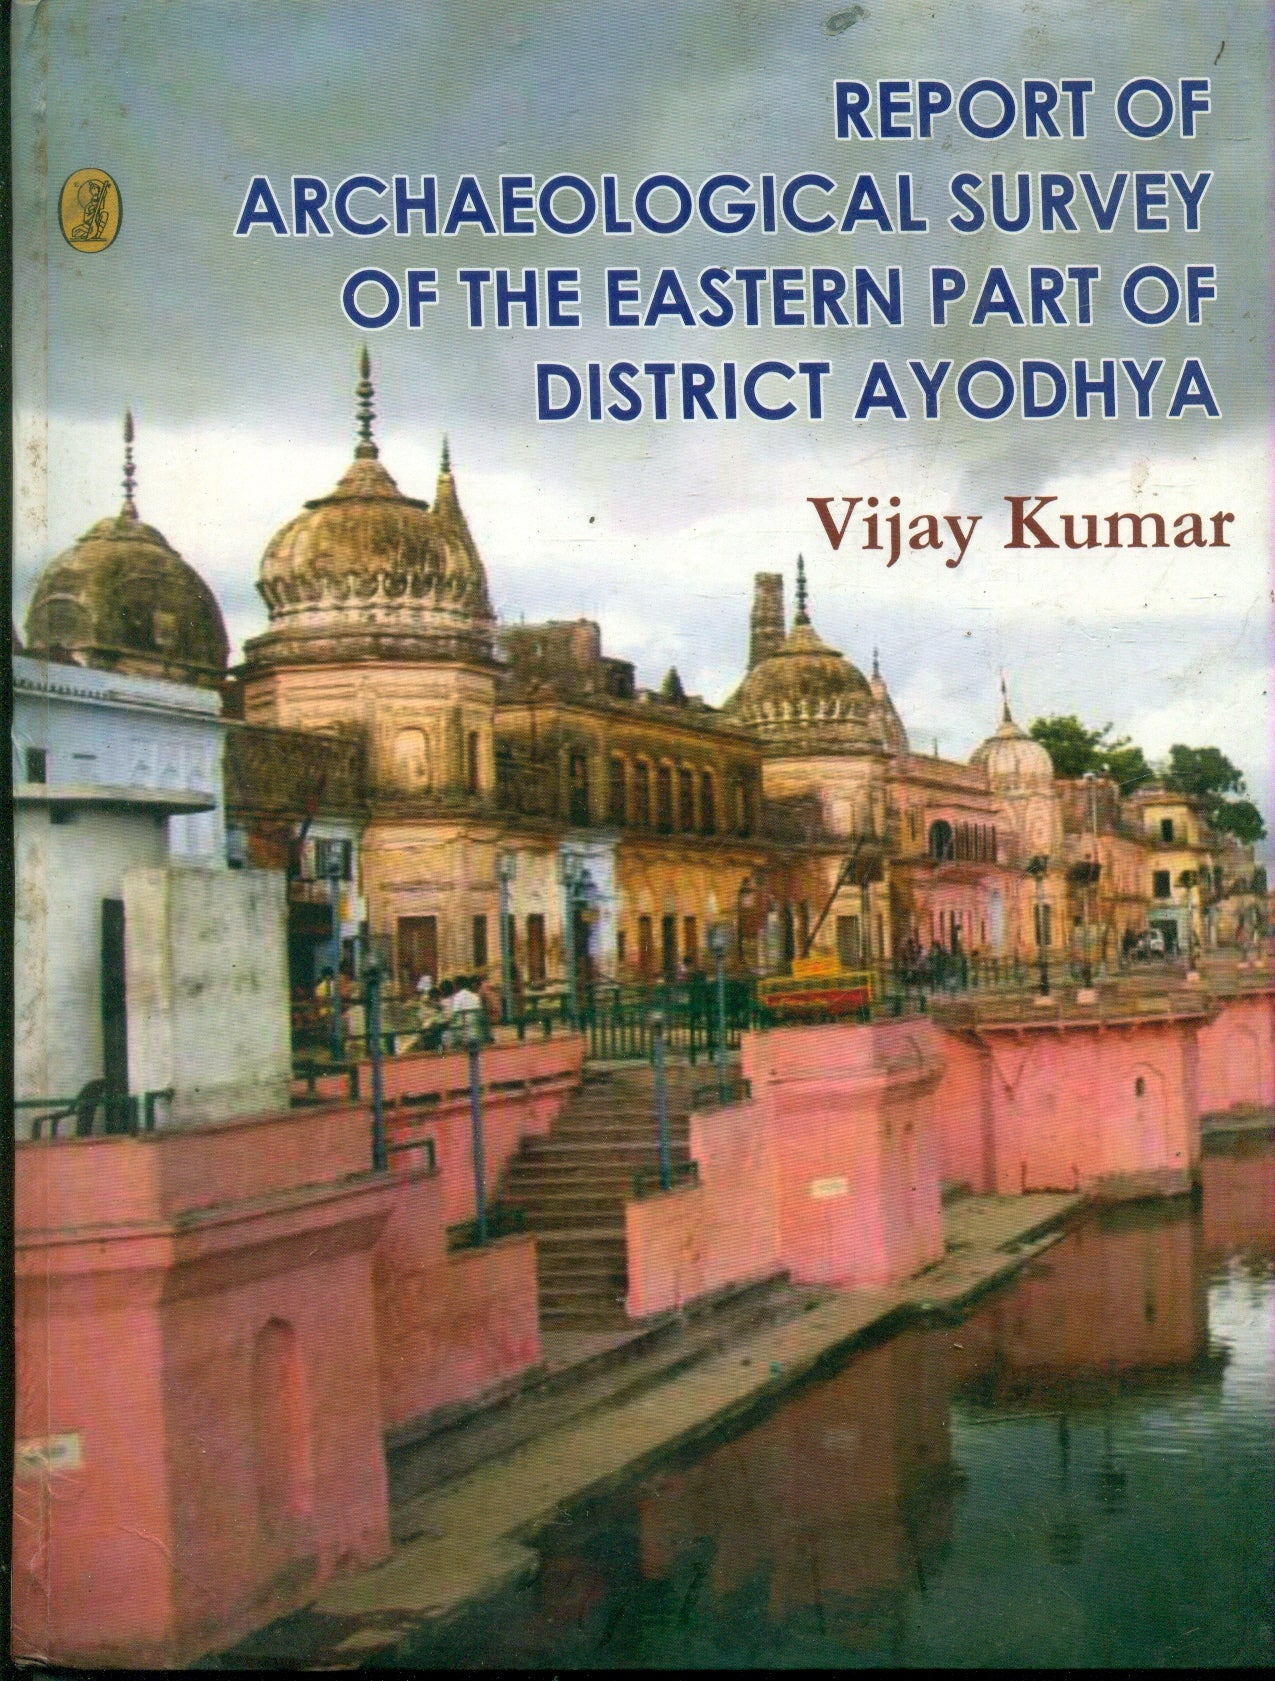 Report of Archaeological Survey of Eastern Part of District Ayodya